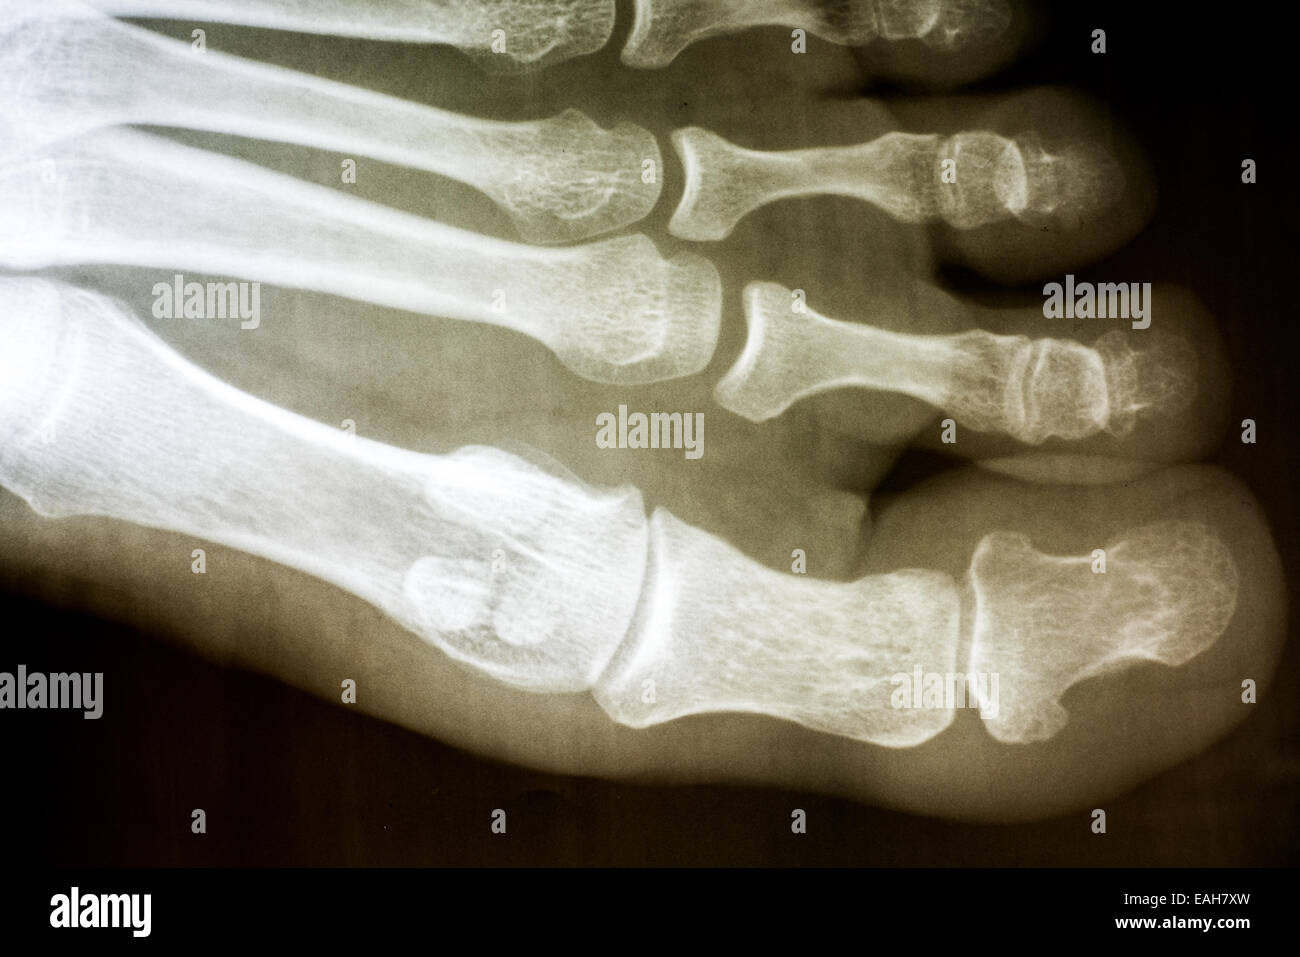 Human Foot X-Ray On Black Background Stock Photo